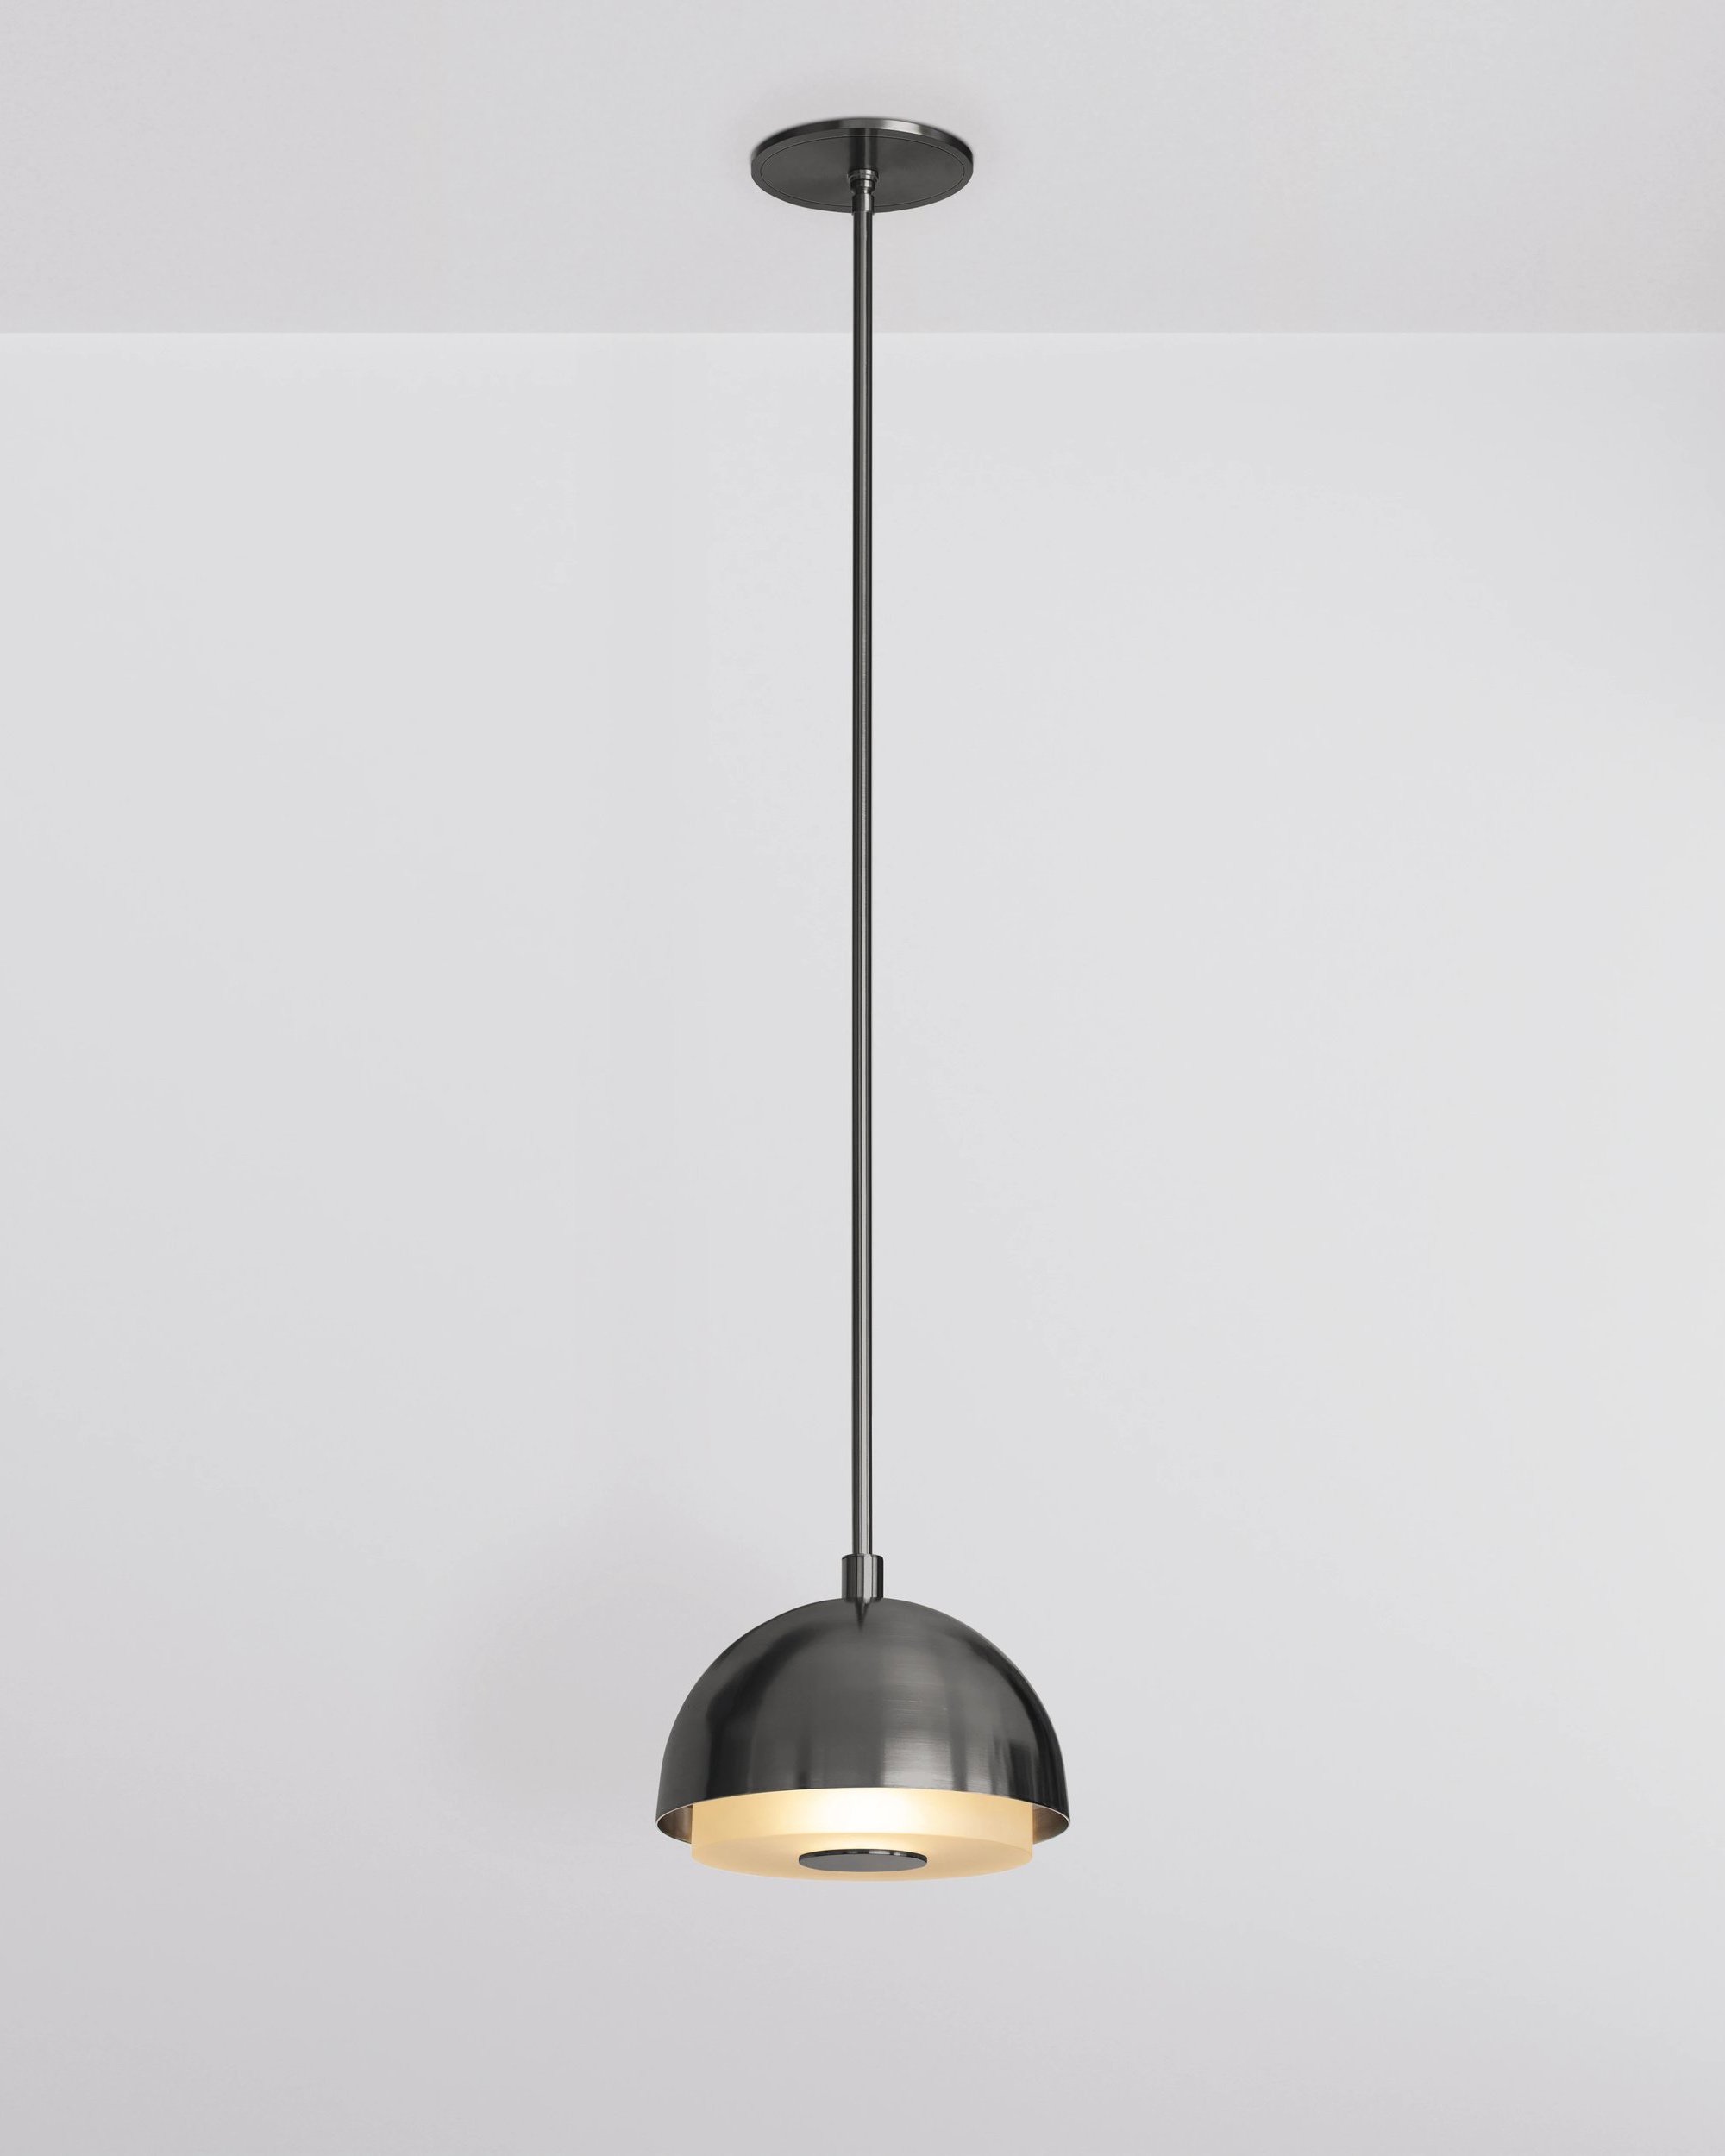 TEMPO 9 SHOWN IN PEWTER